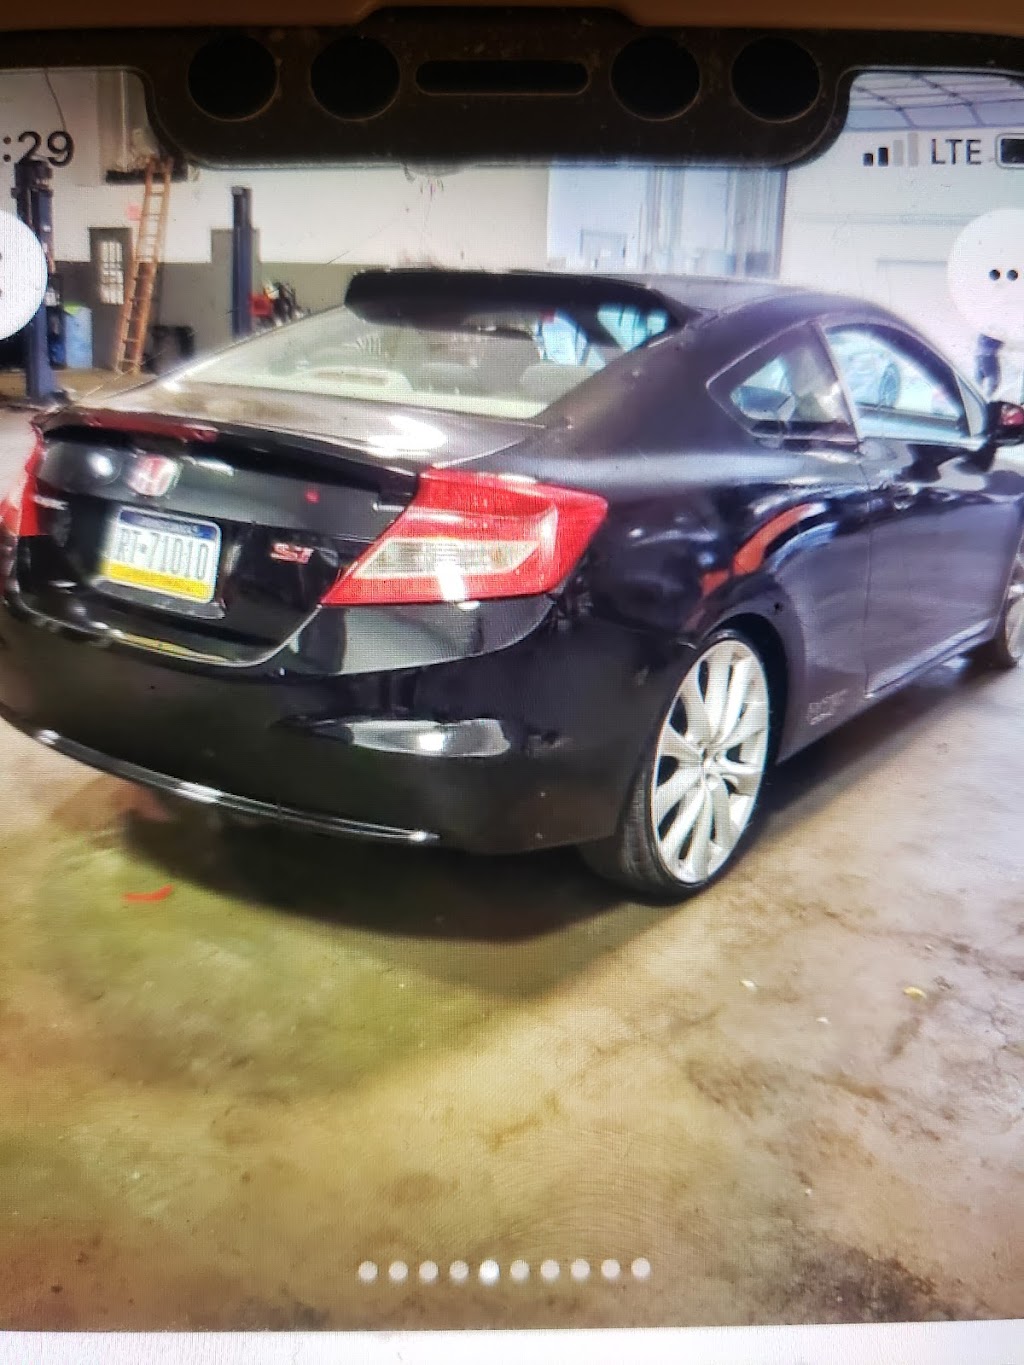 Nv Auto Style | 817 N Gilmore St, Allentown, PA 18109 | Phone: (610) 570-1381